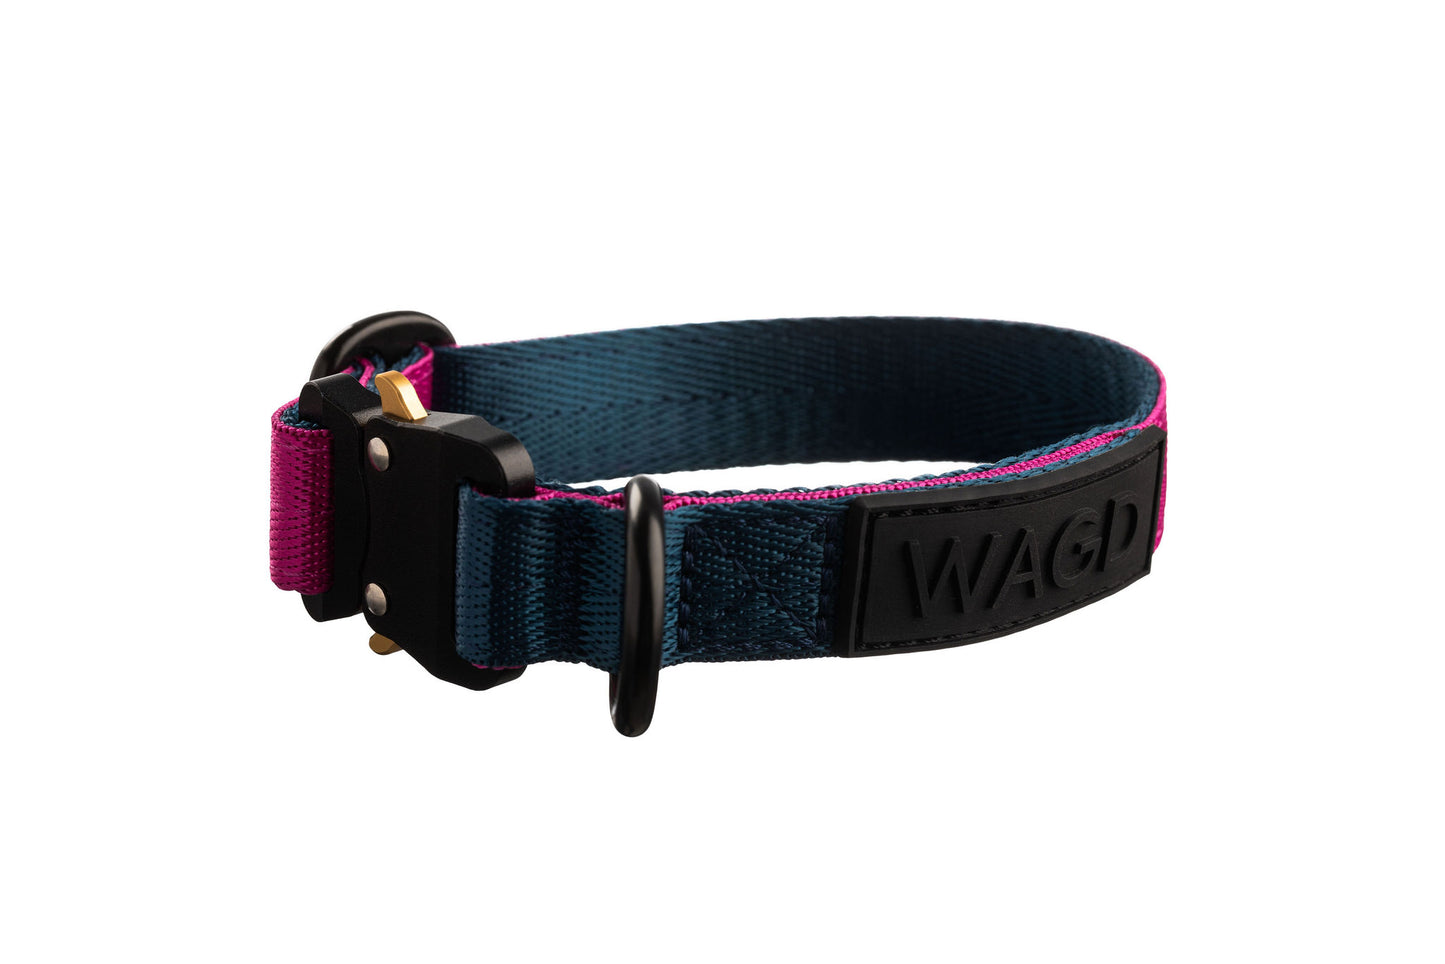 Dog collar in peacock and pink with black clip and d-ring in black. With WAGD Black rubber logo.